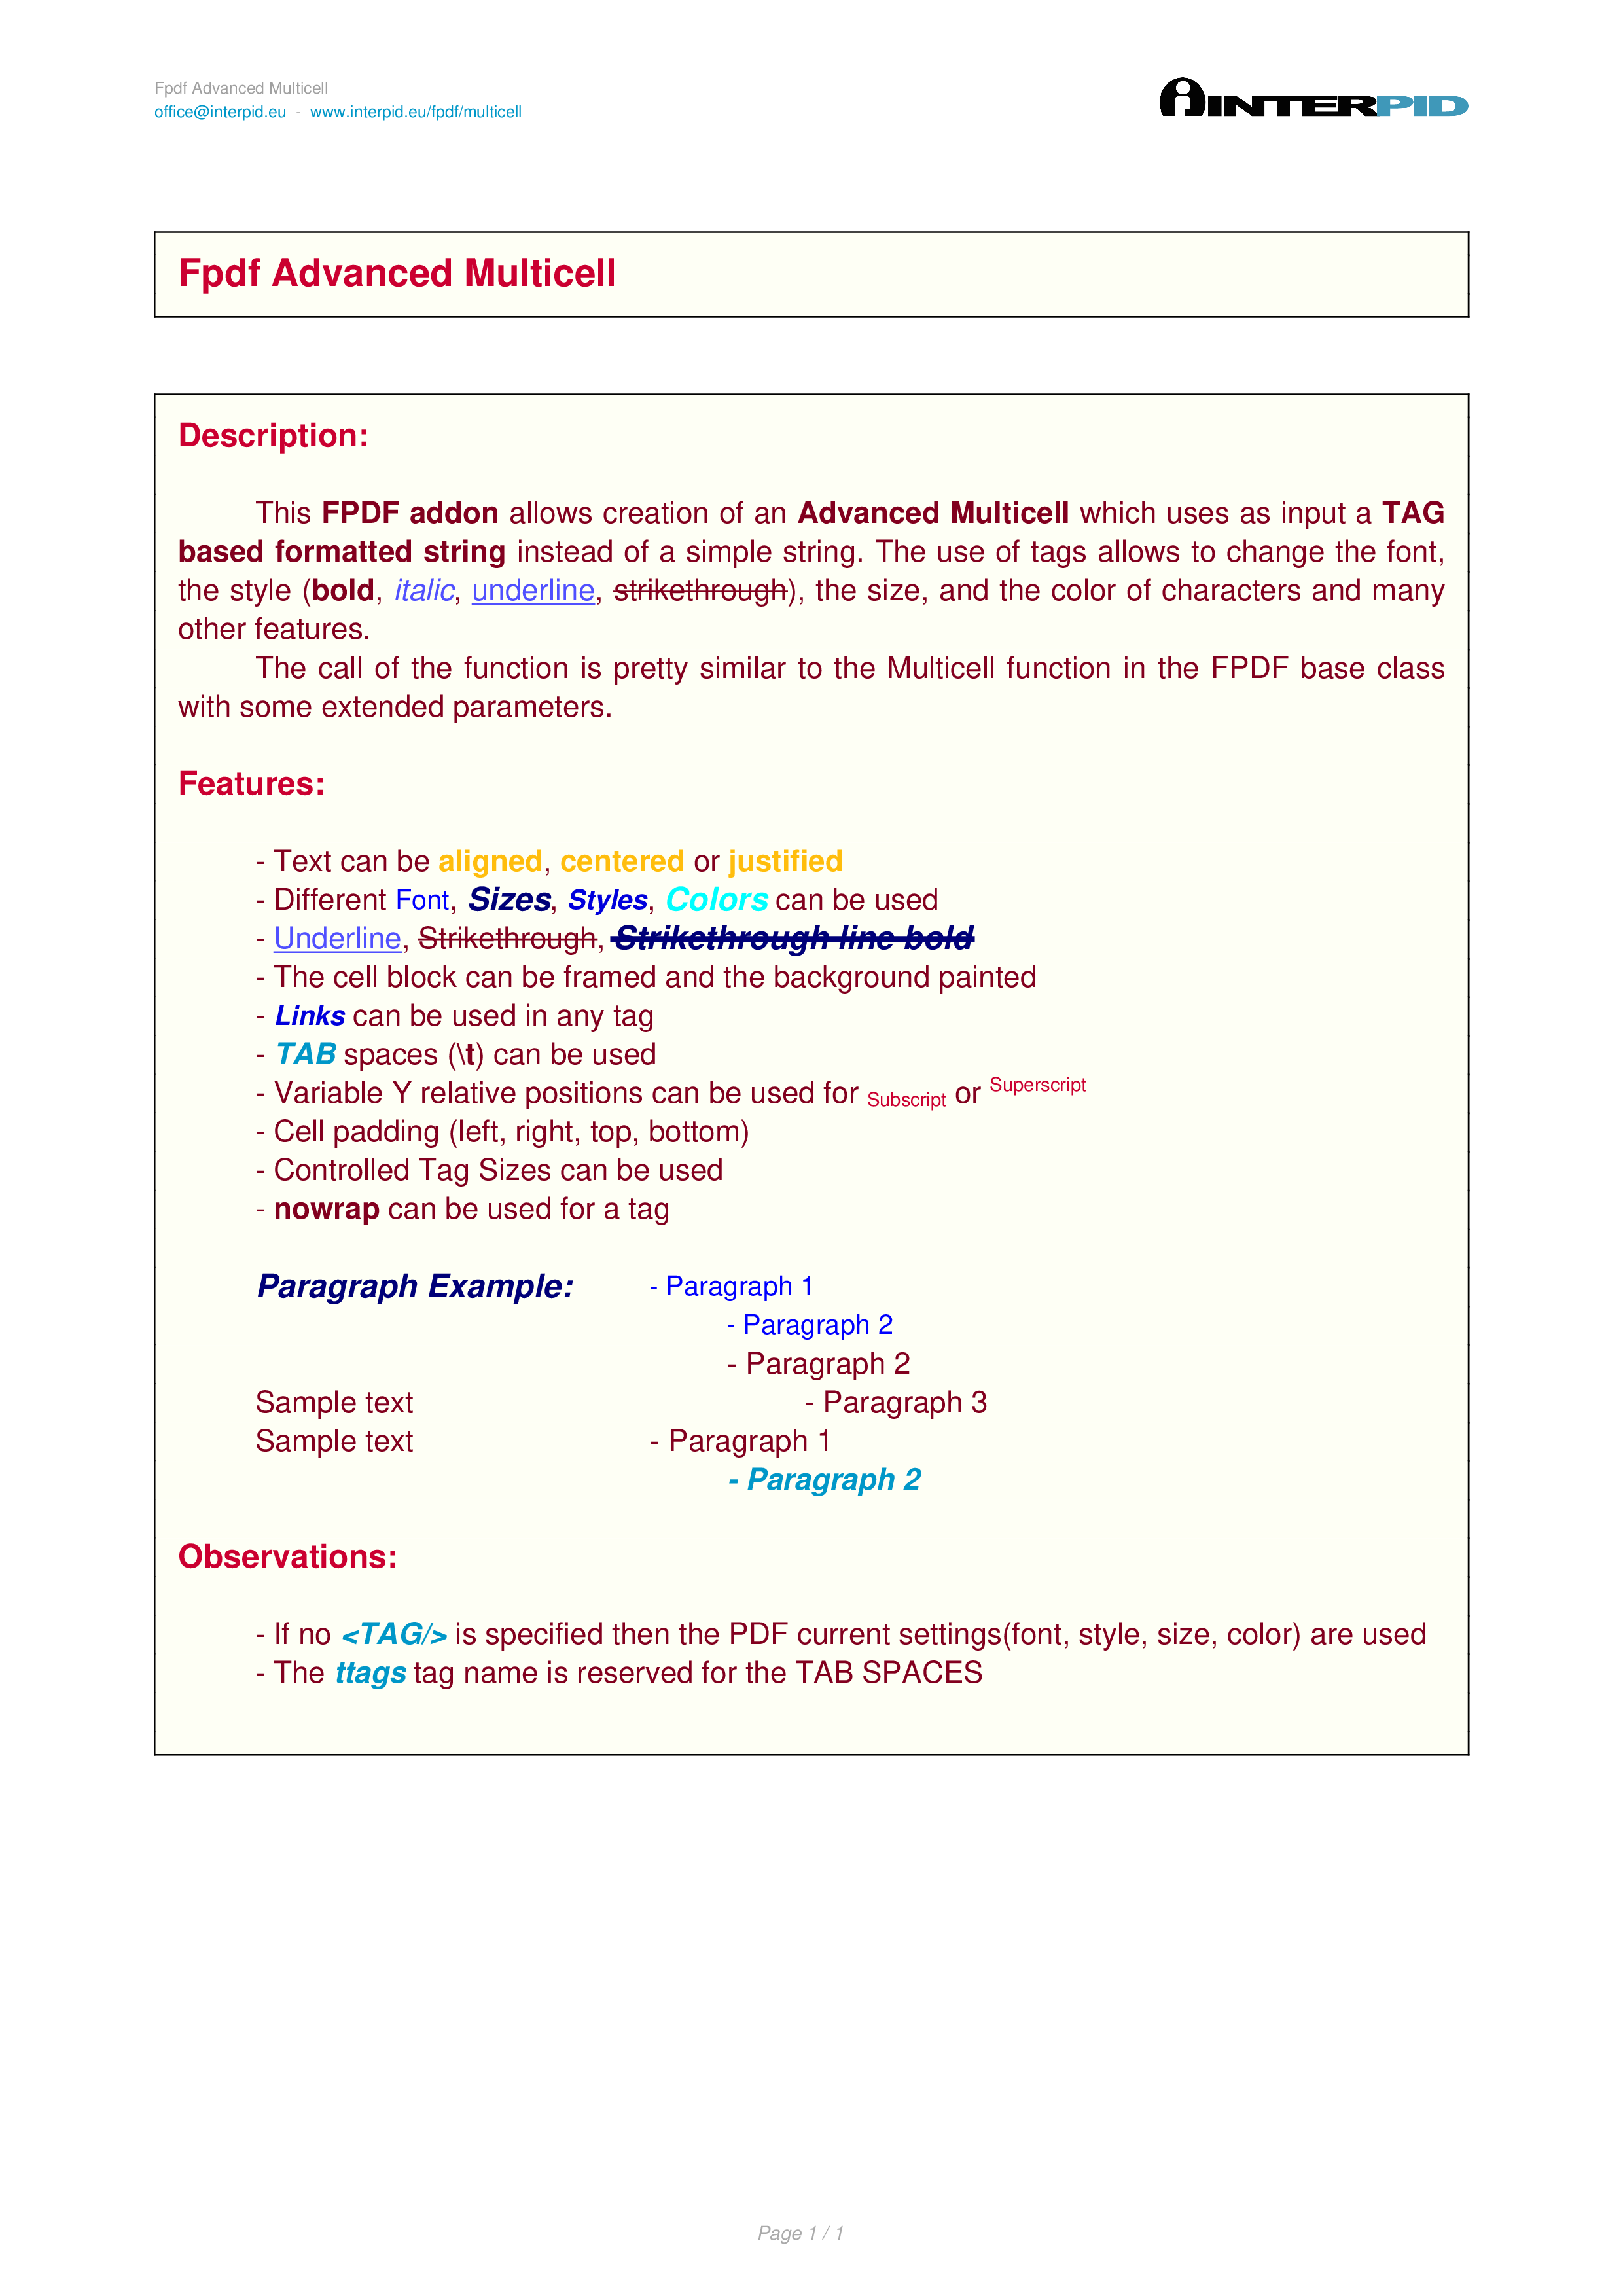 example-multicell-1-overview.png